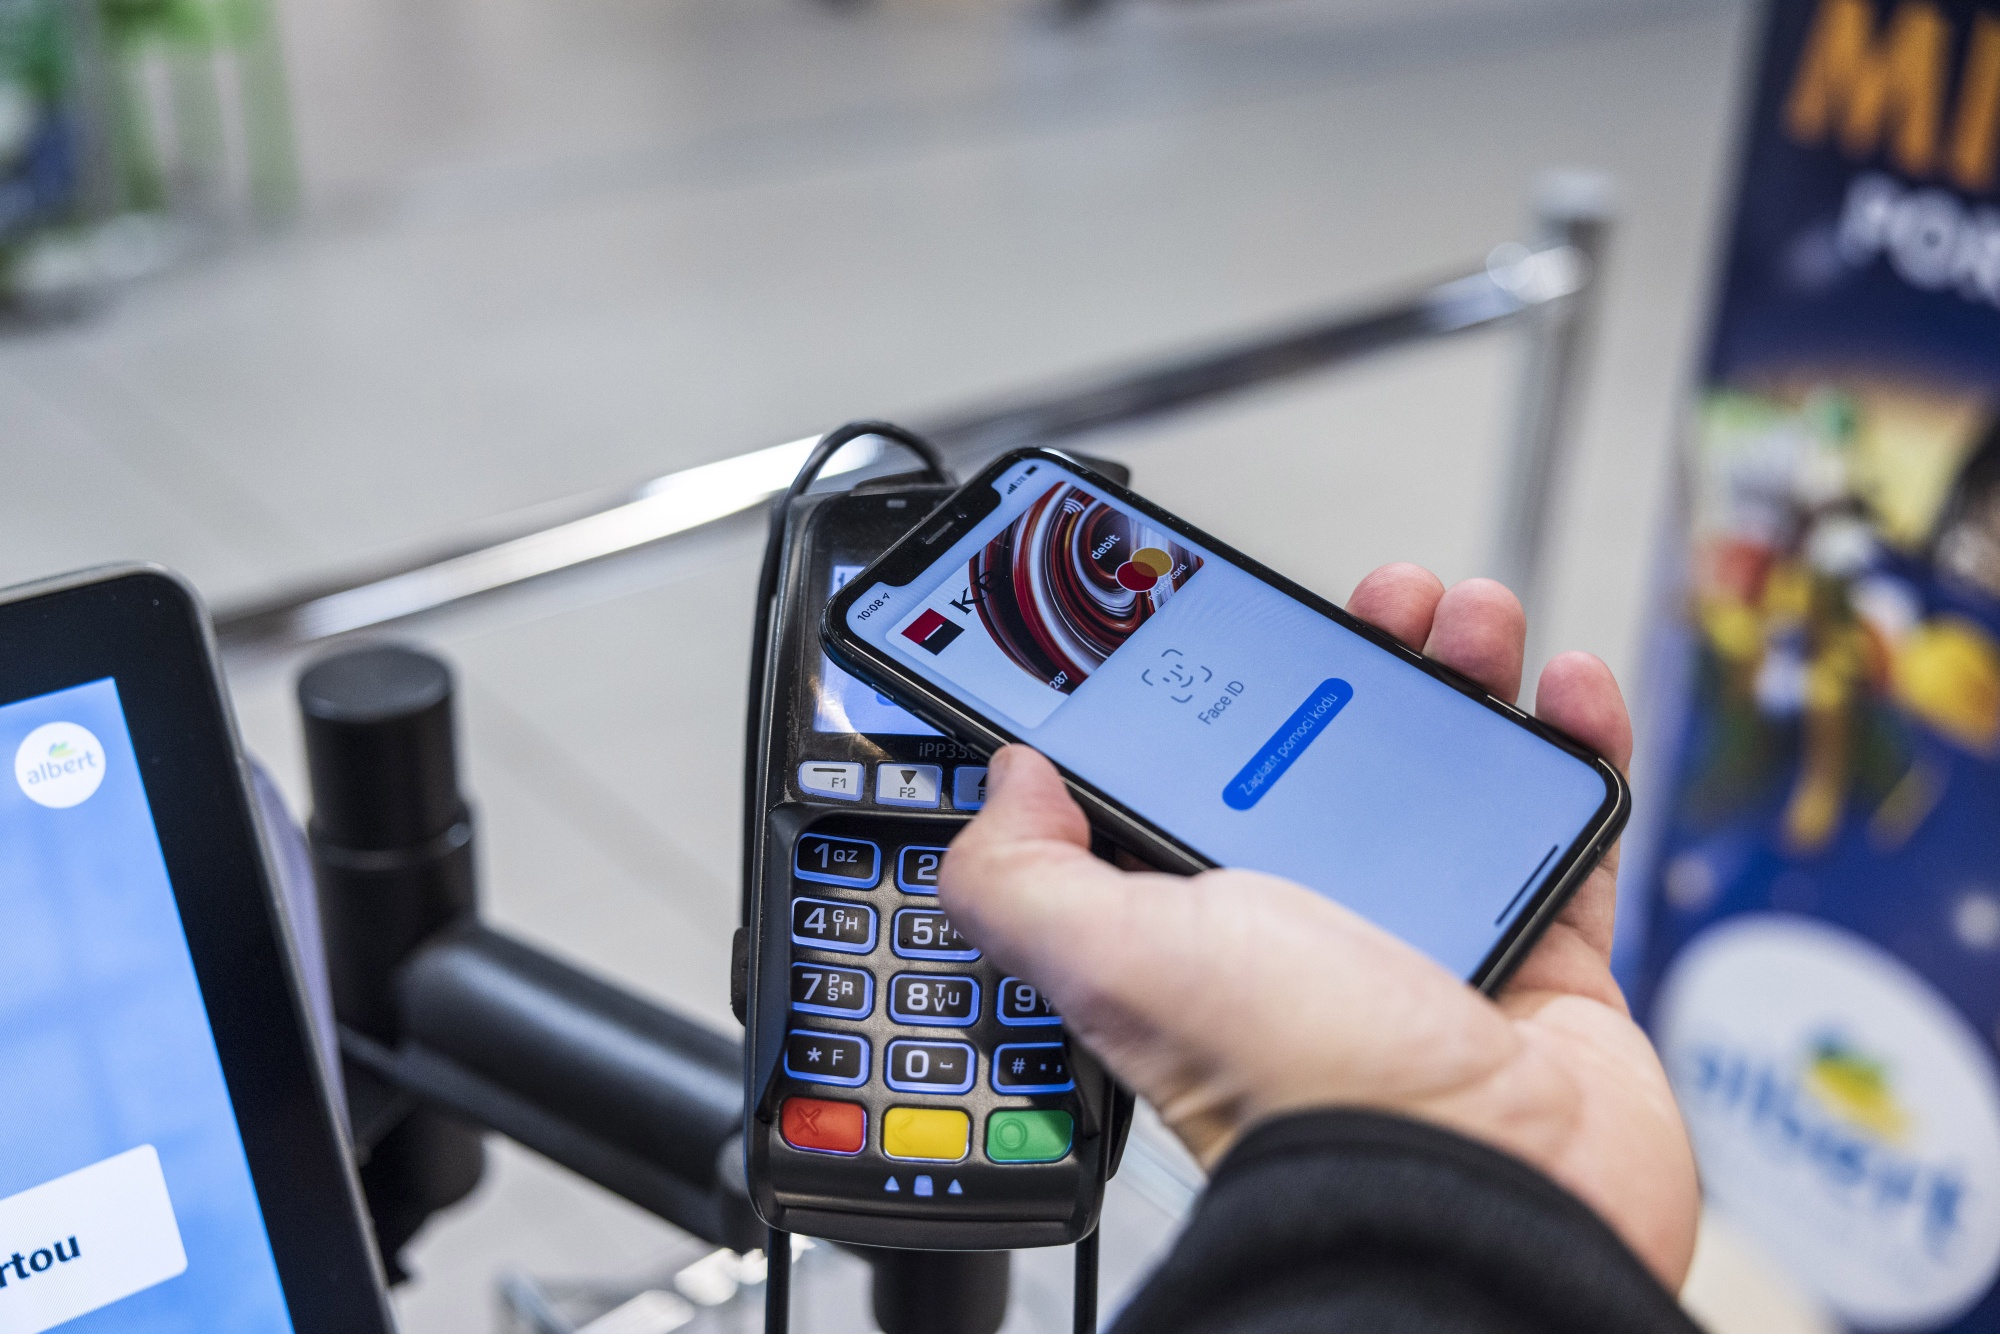 Can Third-Party Banks and for NFC iPhone Use Apple Apps - Tap-to-Pay? Bloomberg (AAPL)